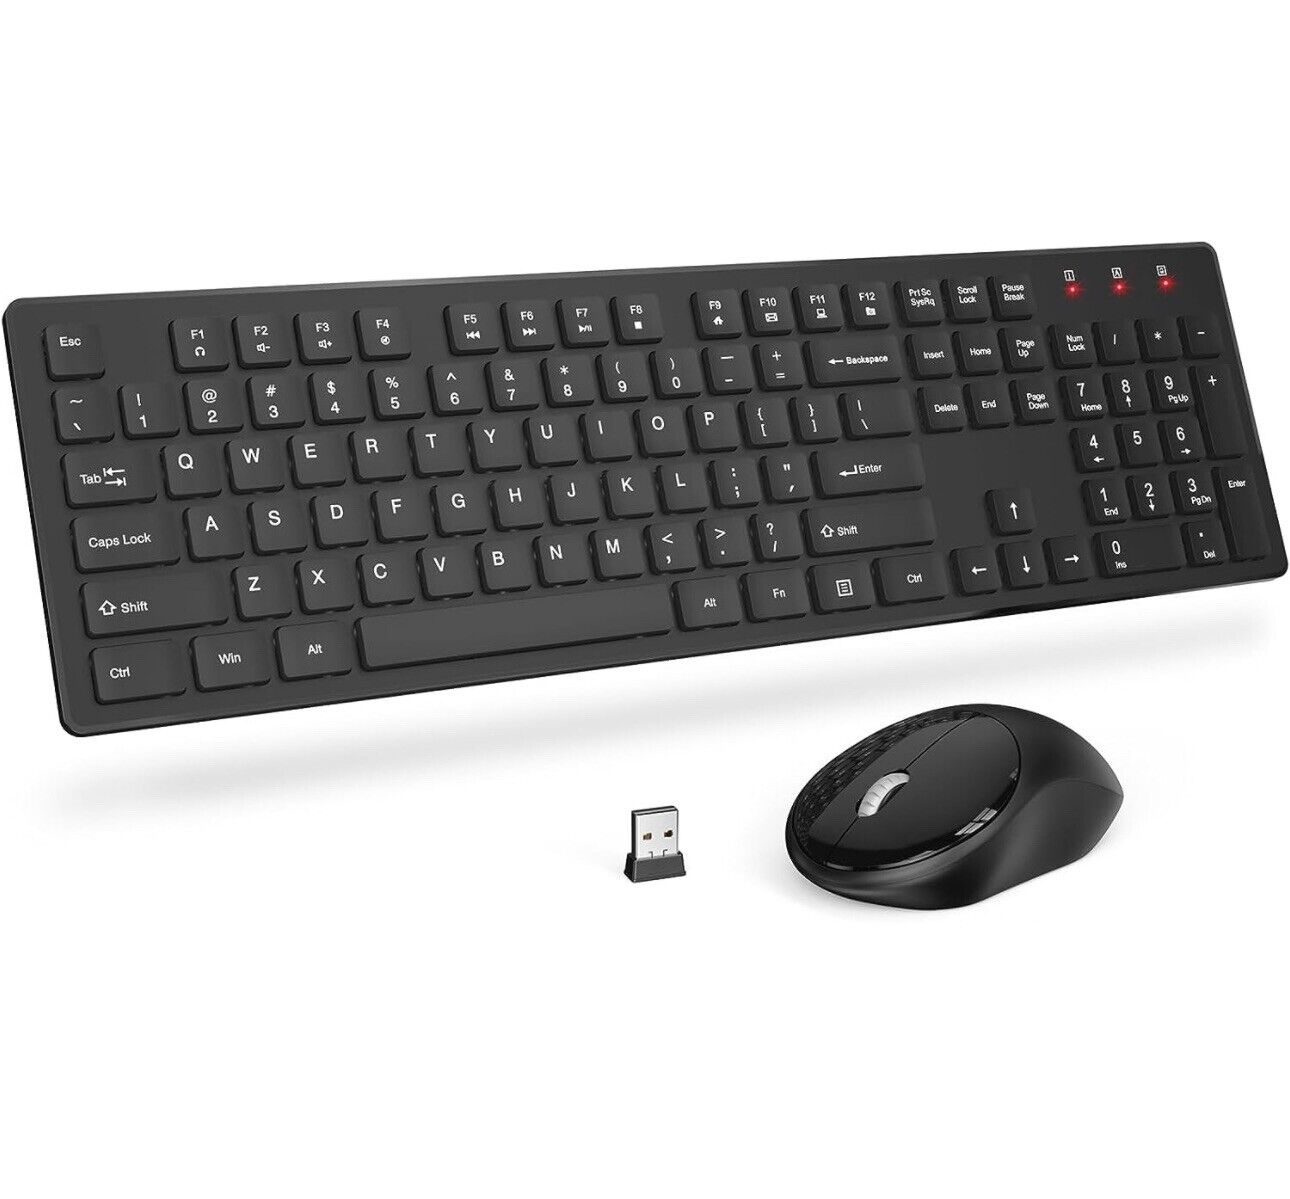 Wireless Keyboard and Mouse, Trueque Silent 2.4GHz Cordless Full Size USB Key...